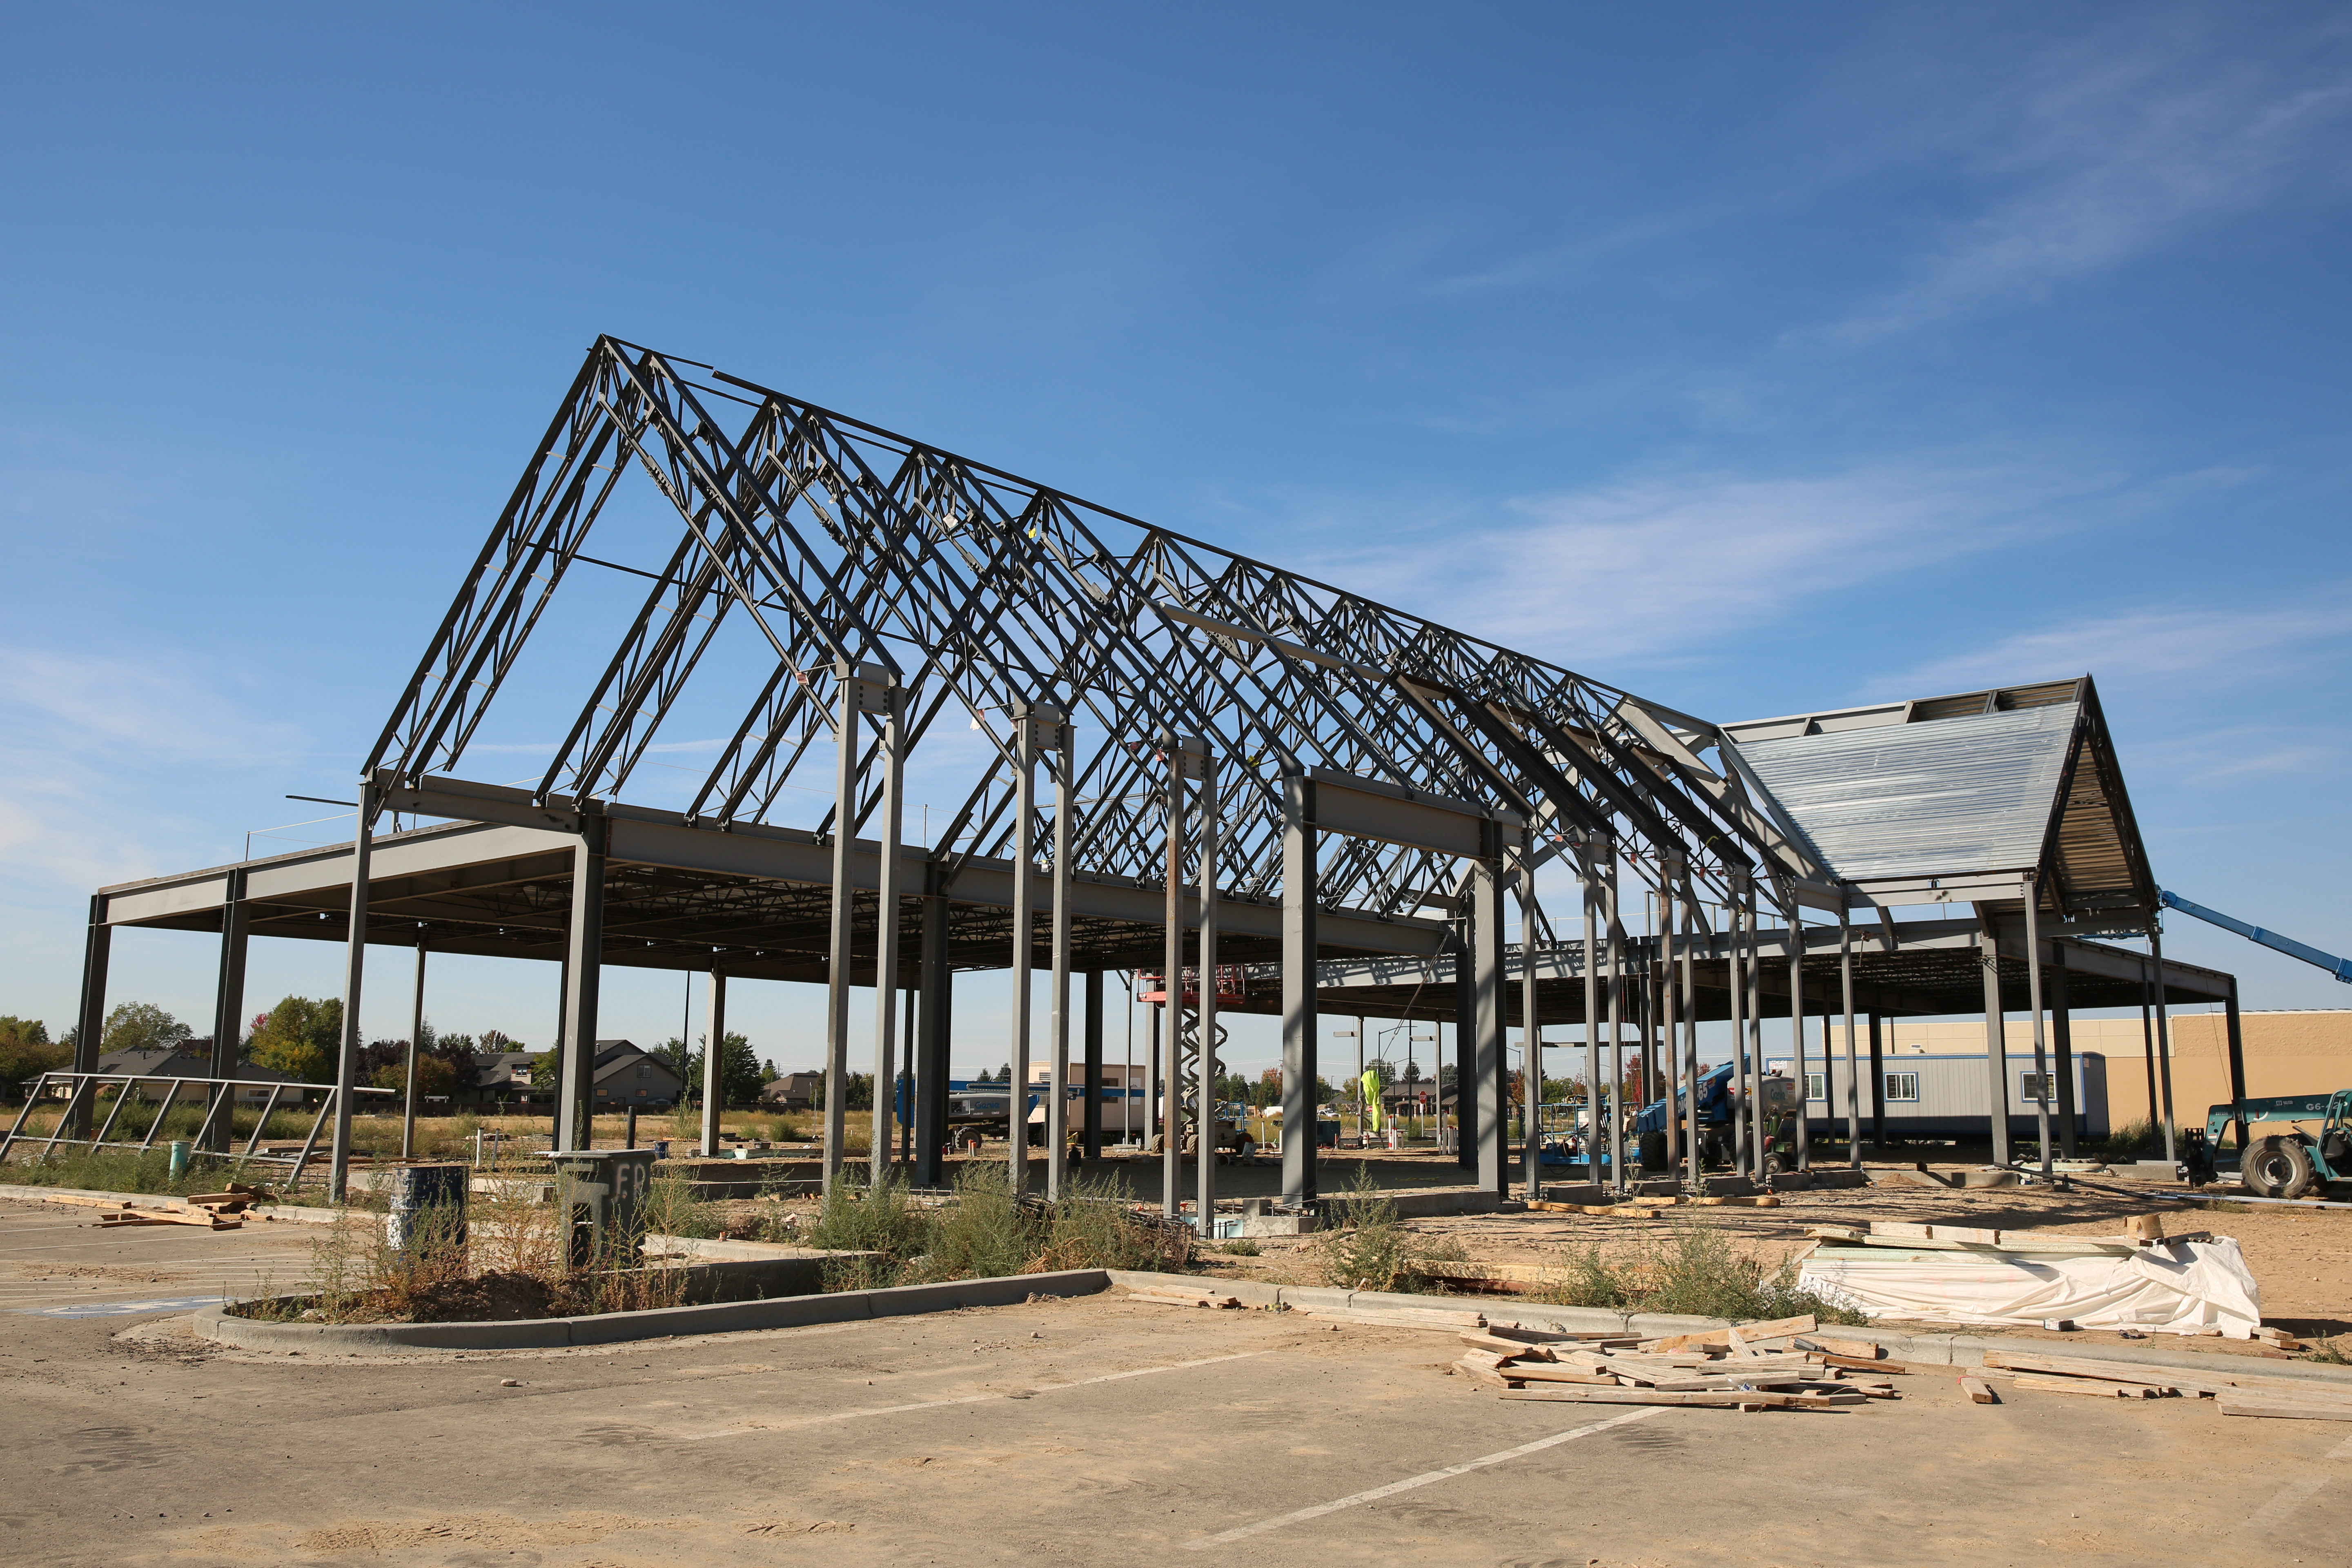 Orchard Park Construction exterior showing the framework of the building